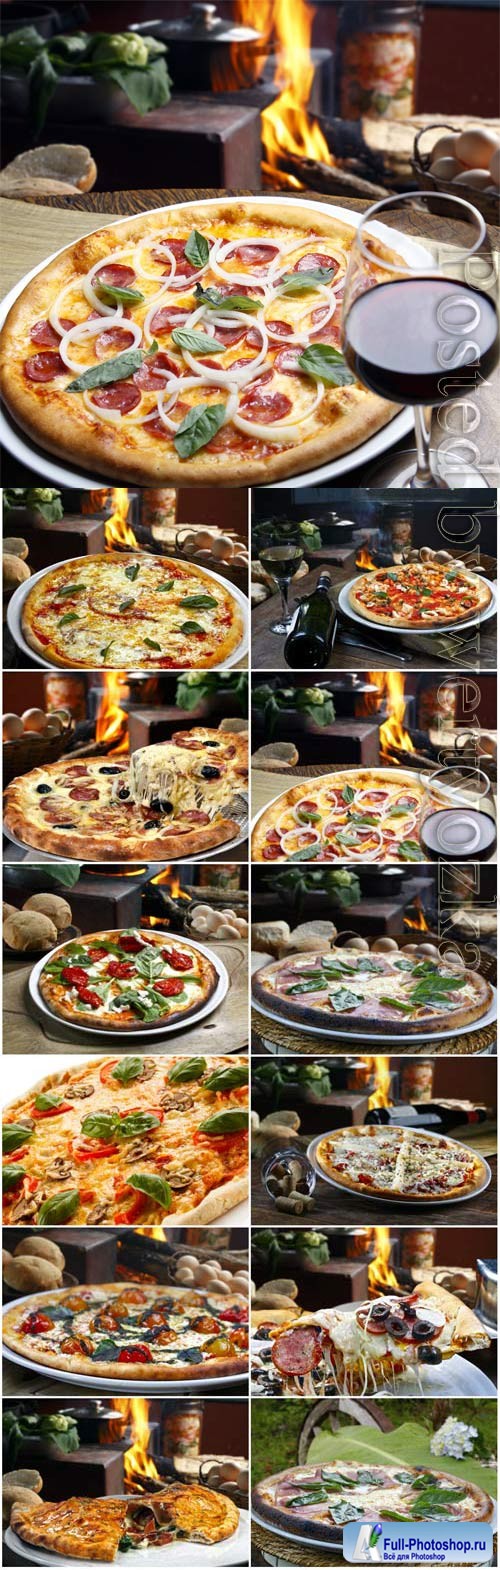 Delicious pizza and glass with wine stock photo